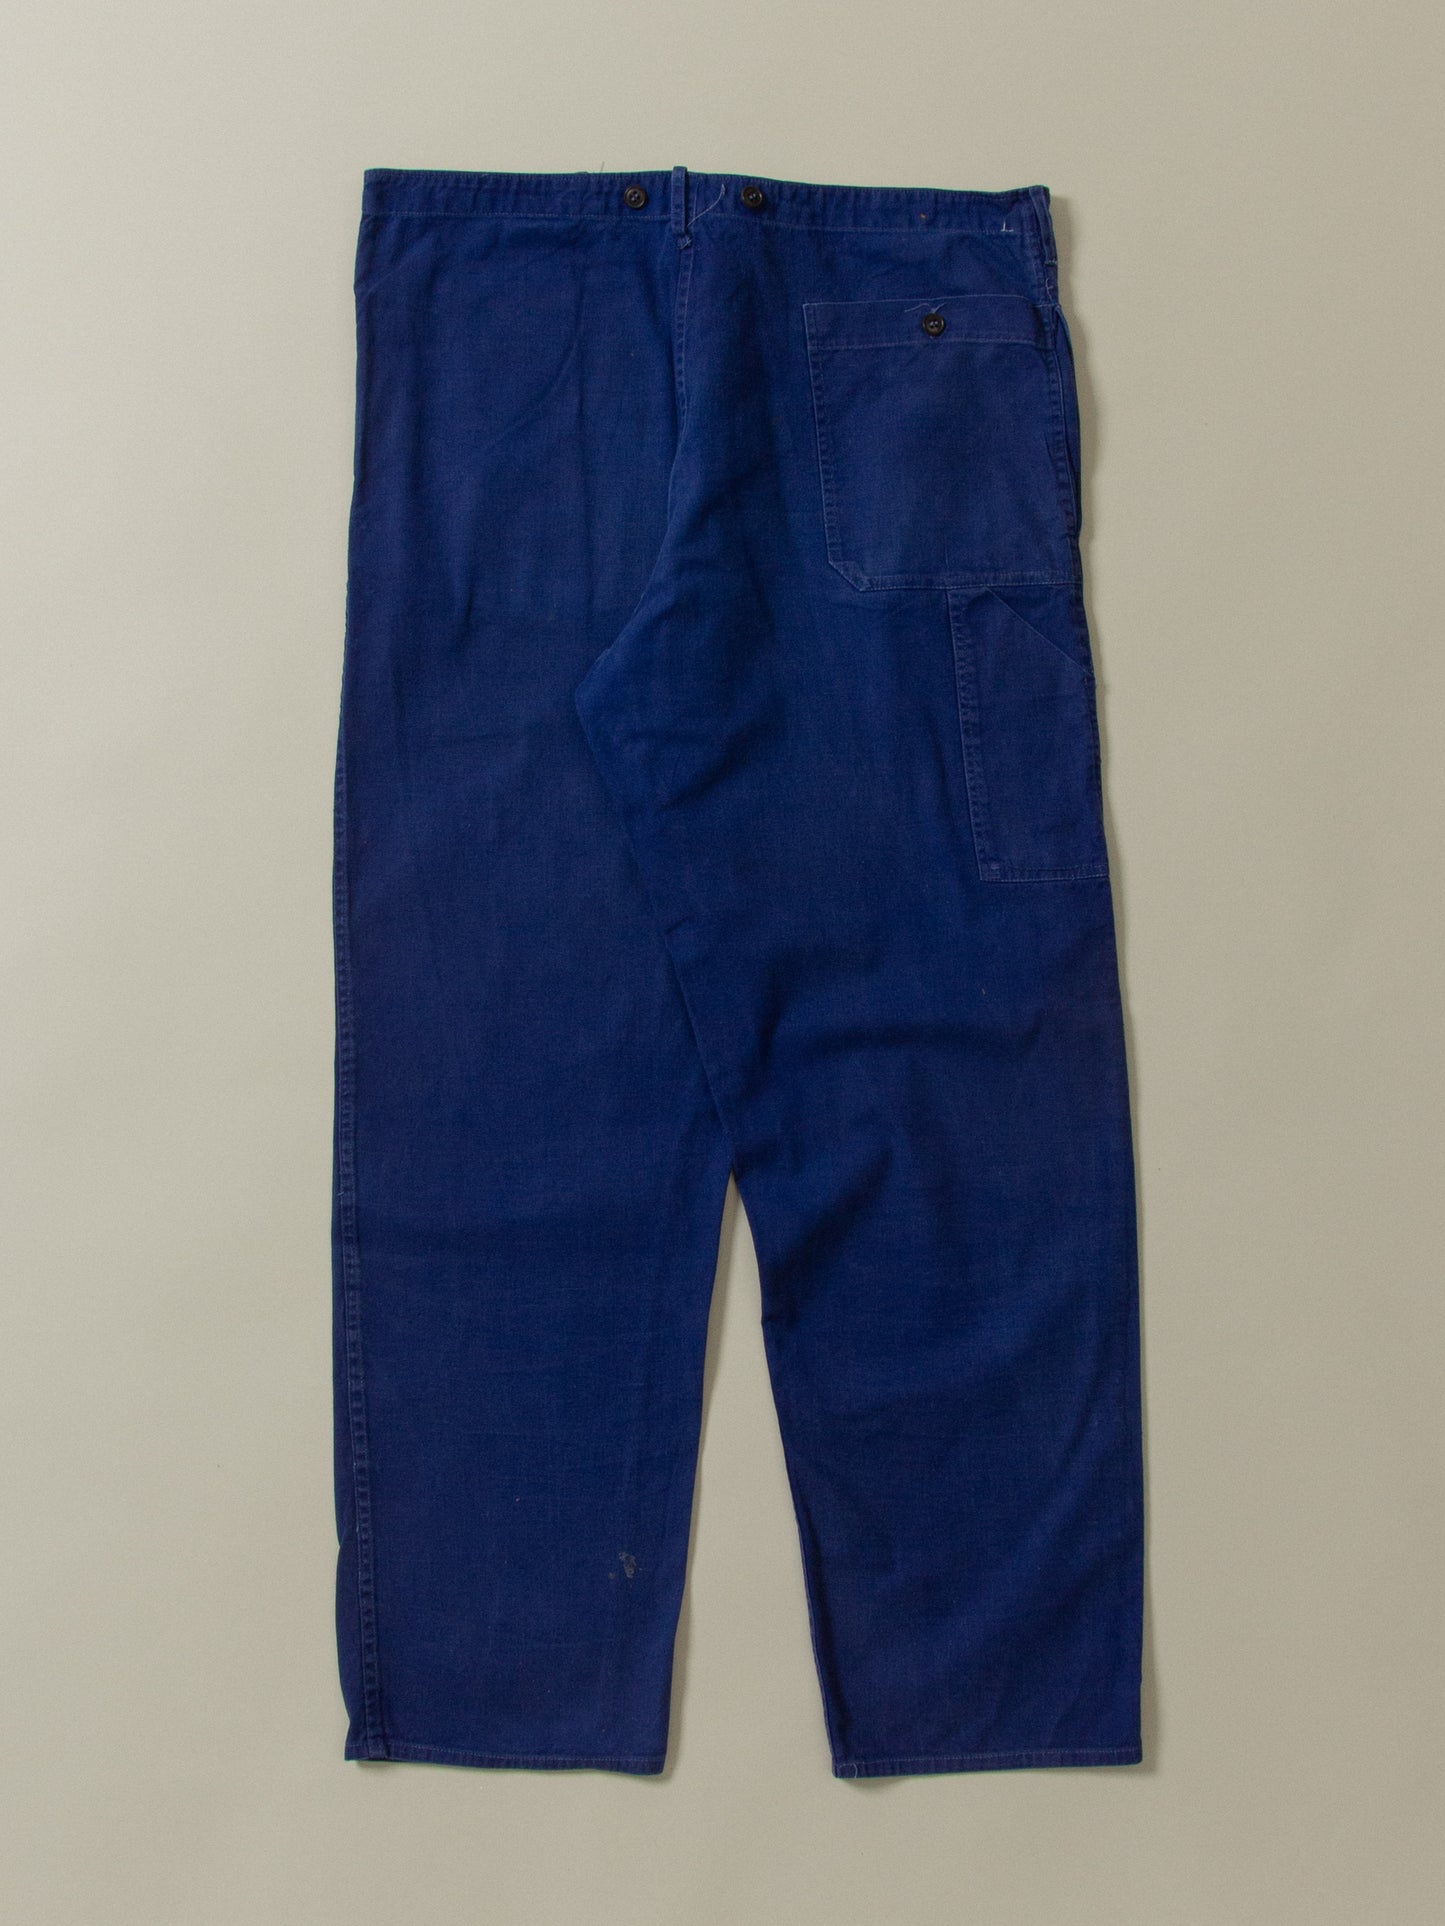 Vtg French Workwear Trousers (36x29)